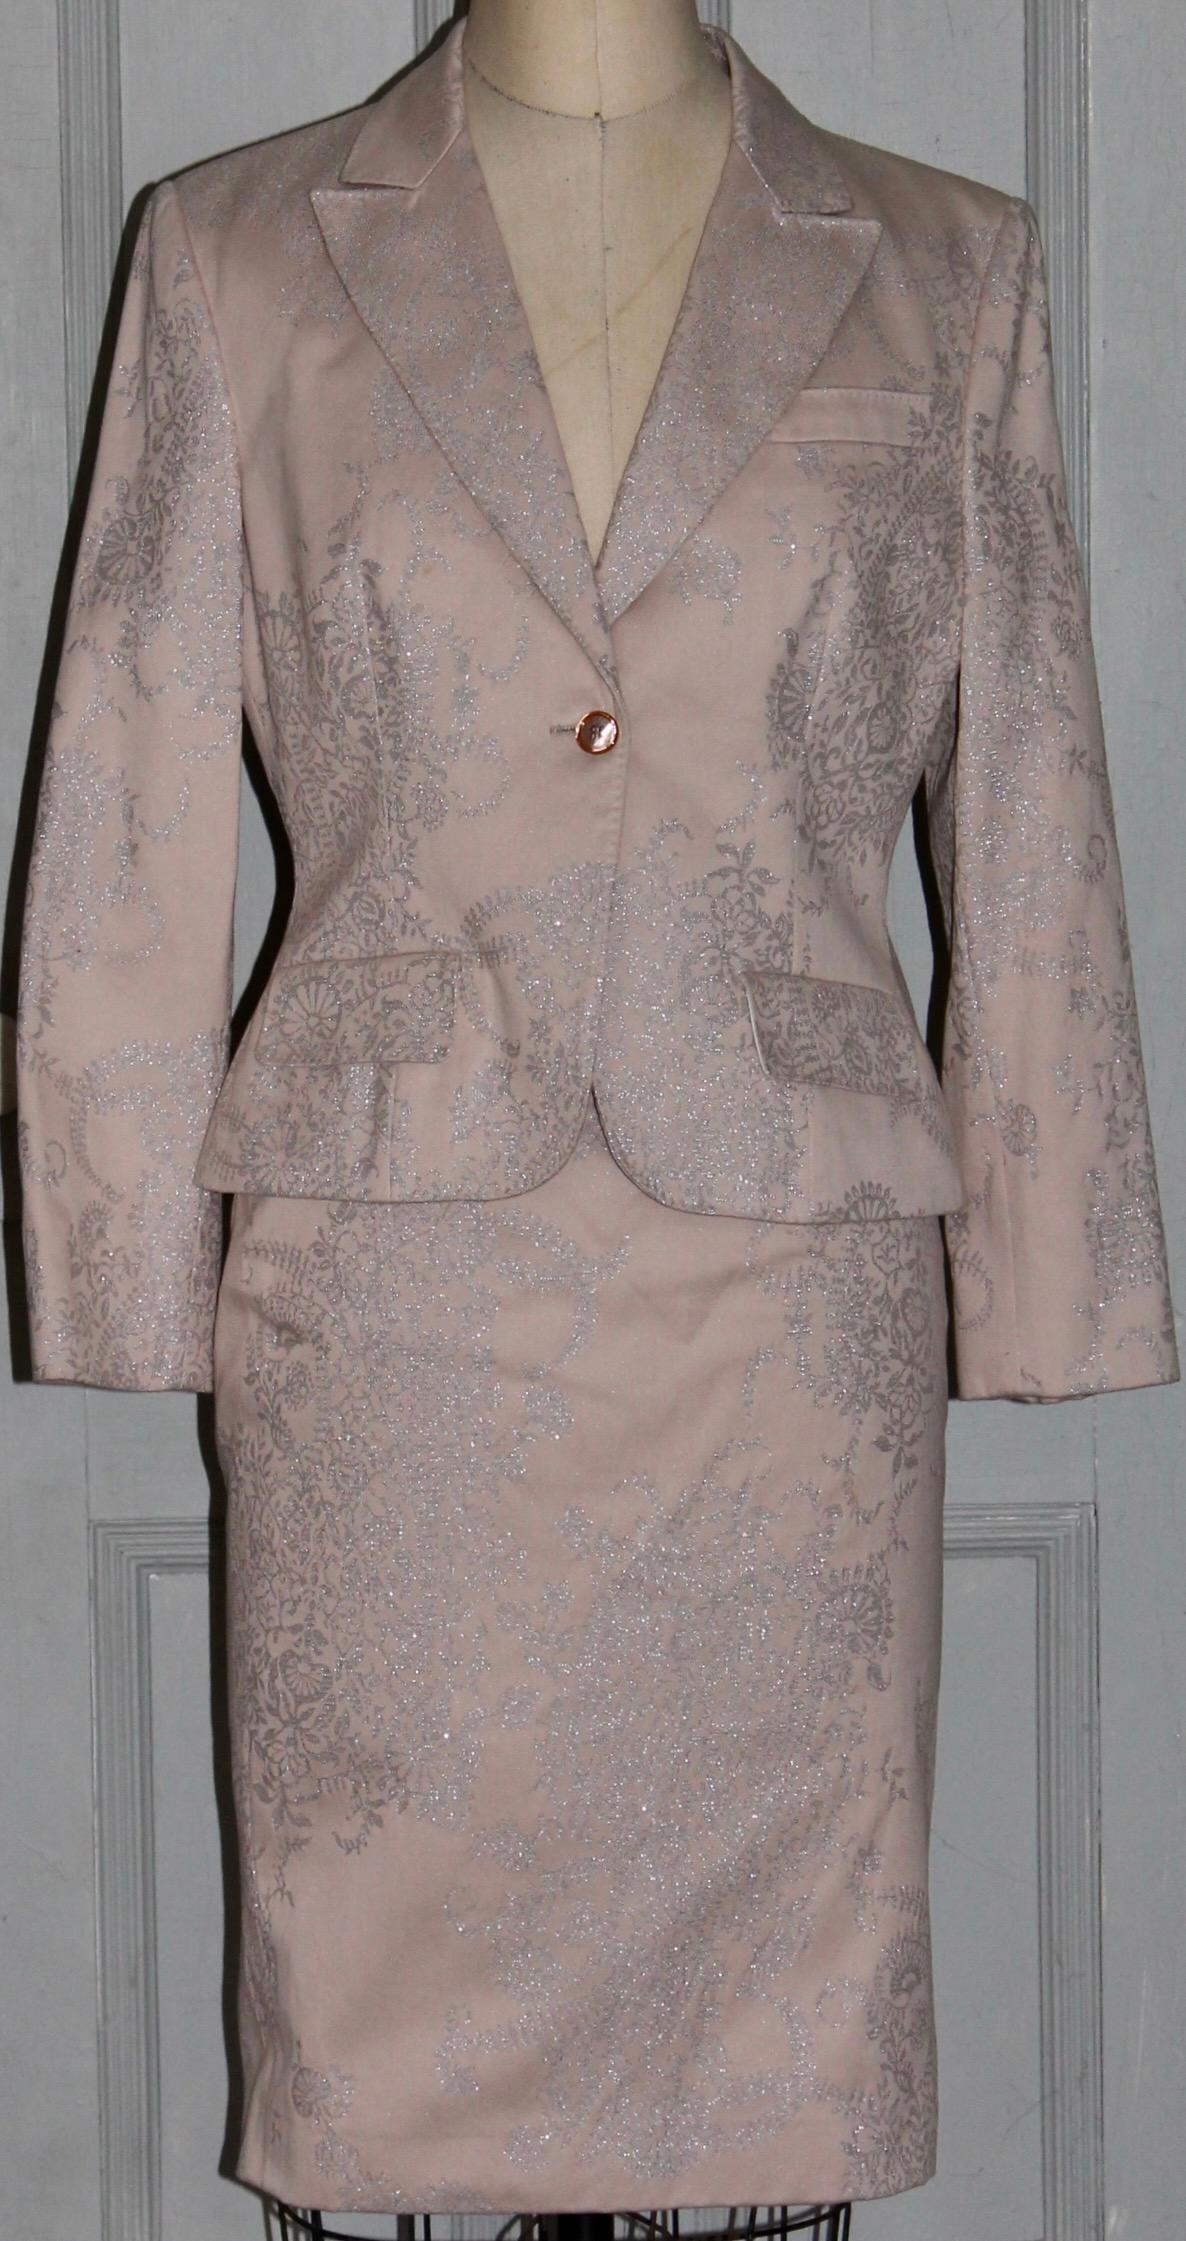 Offering an Alexander McQueen Pale Rose Skirt Suit, with impressed silver metallic floral design. Made in Italy.  Chain Label (needs reattaching). Length of jacket 23